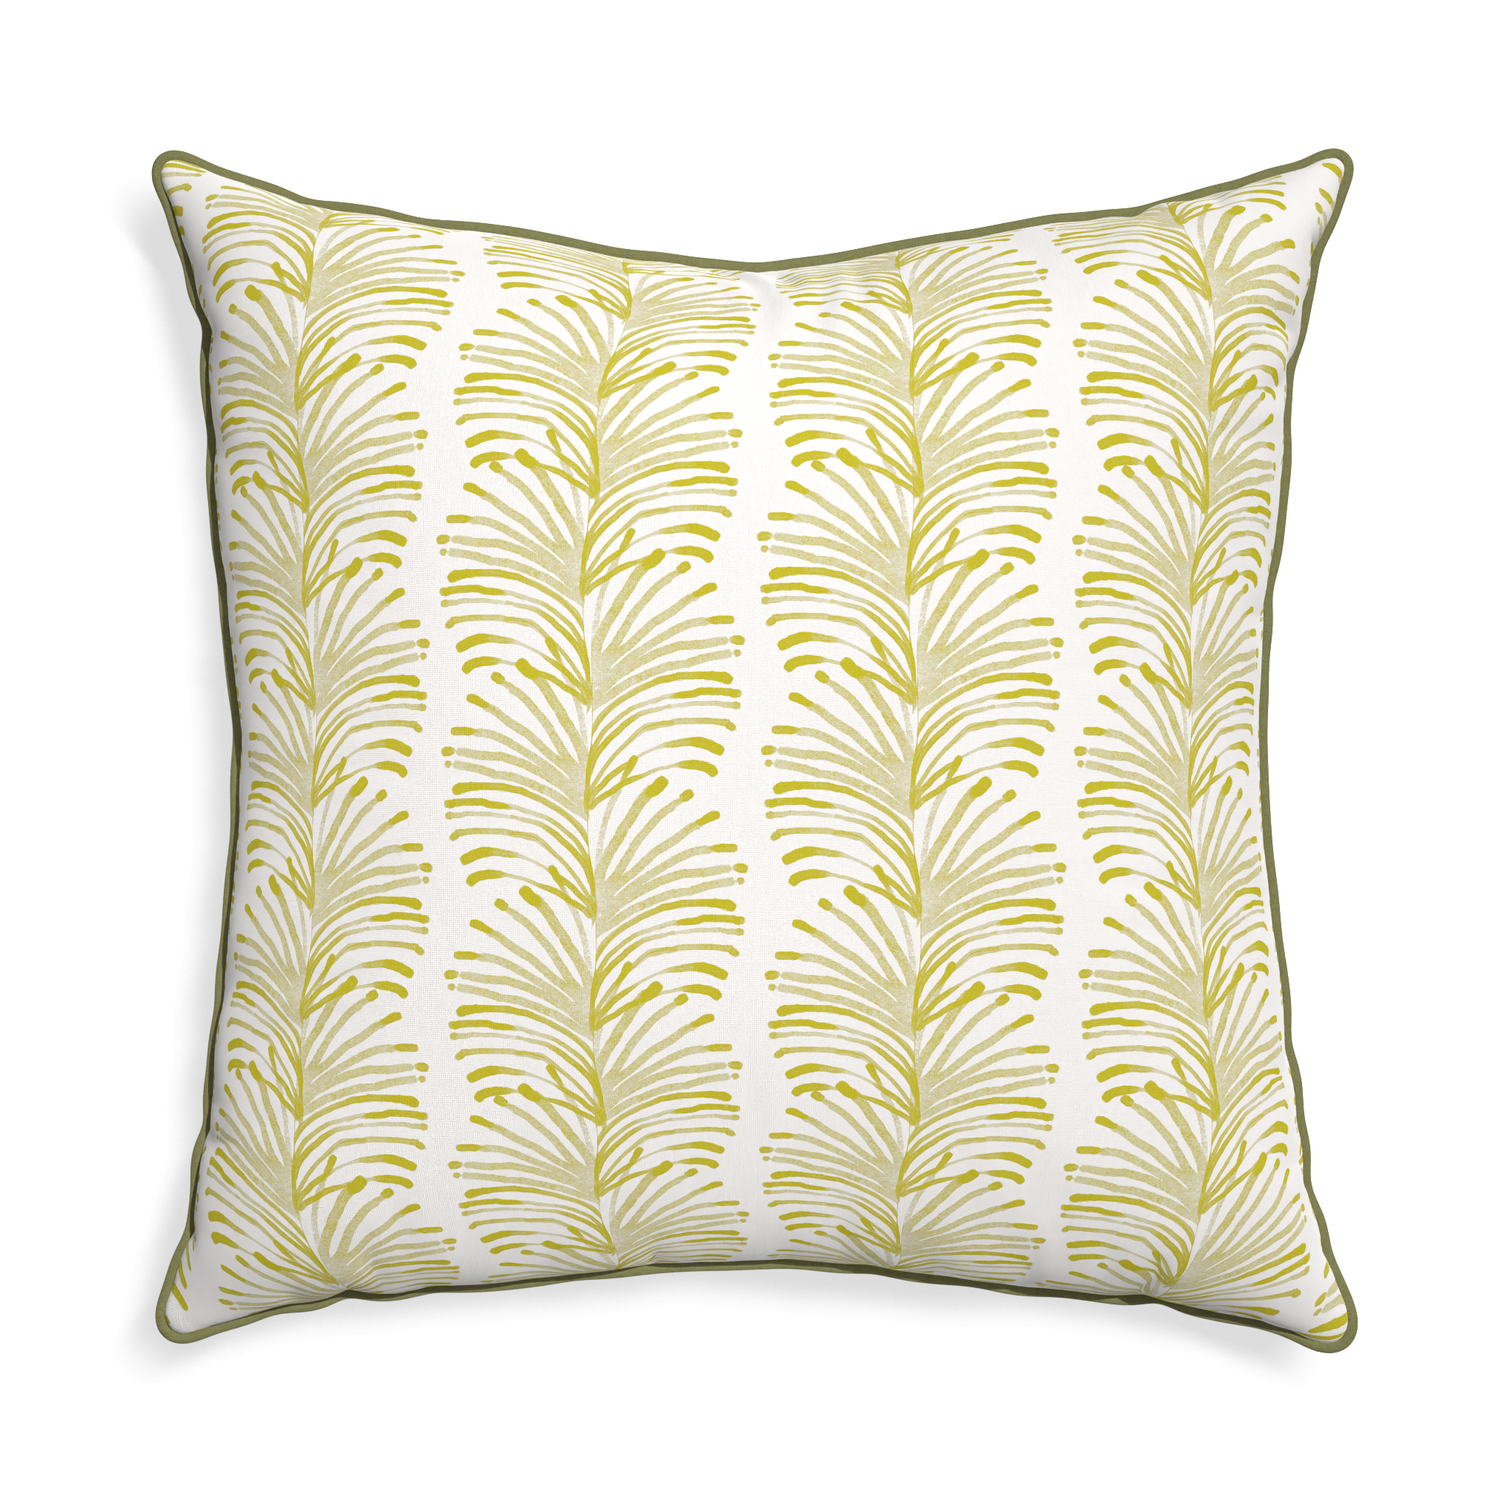 Euro-sham emma chartreuse custom pillow with moss piping on white background